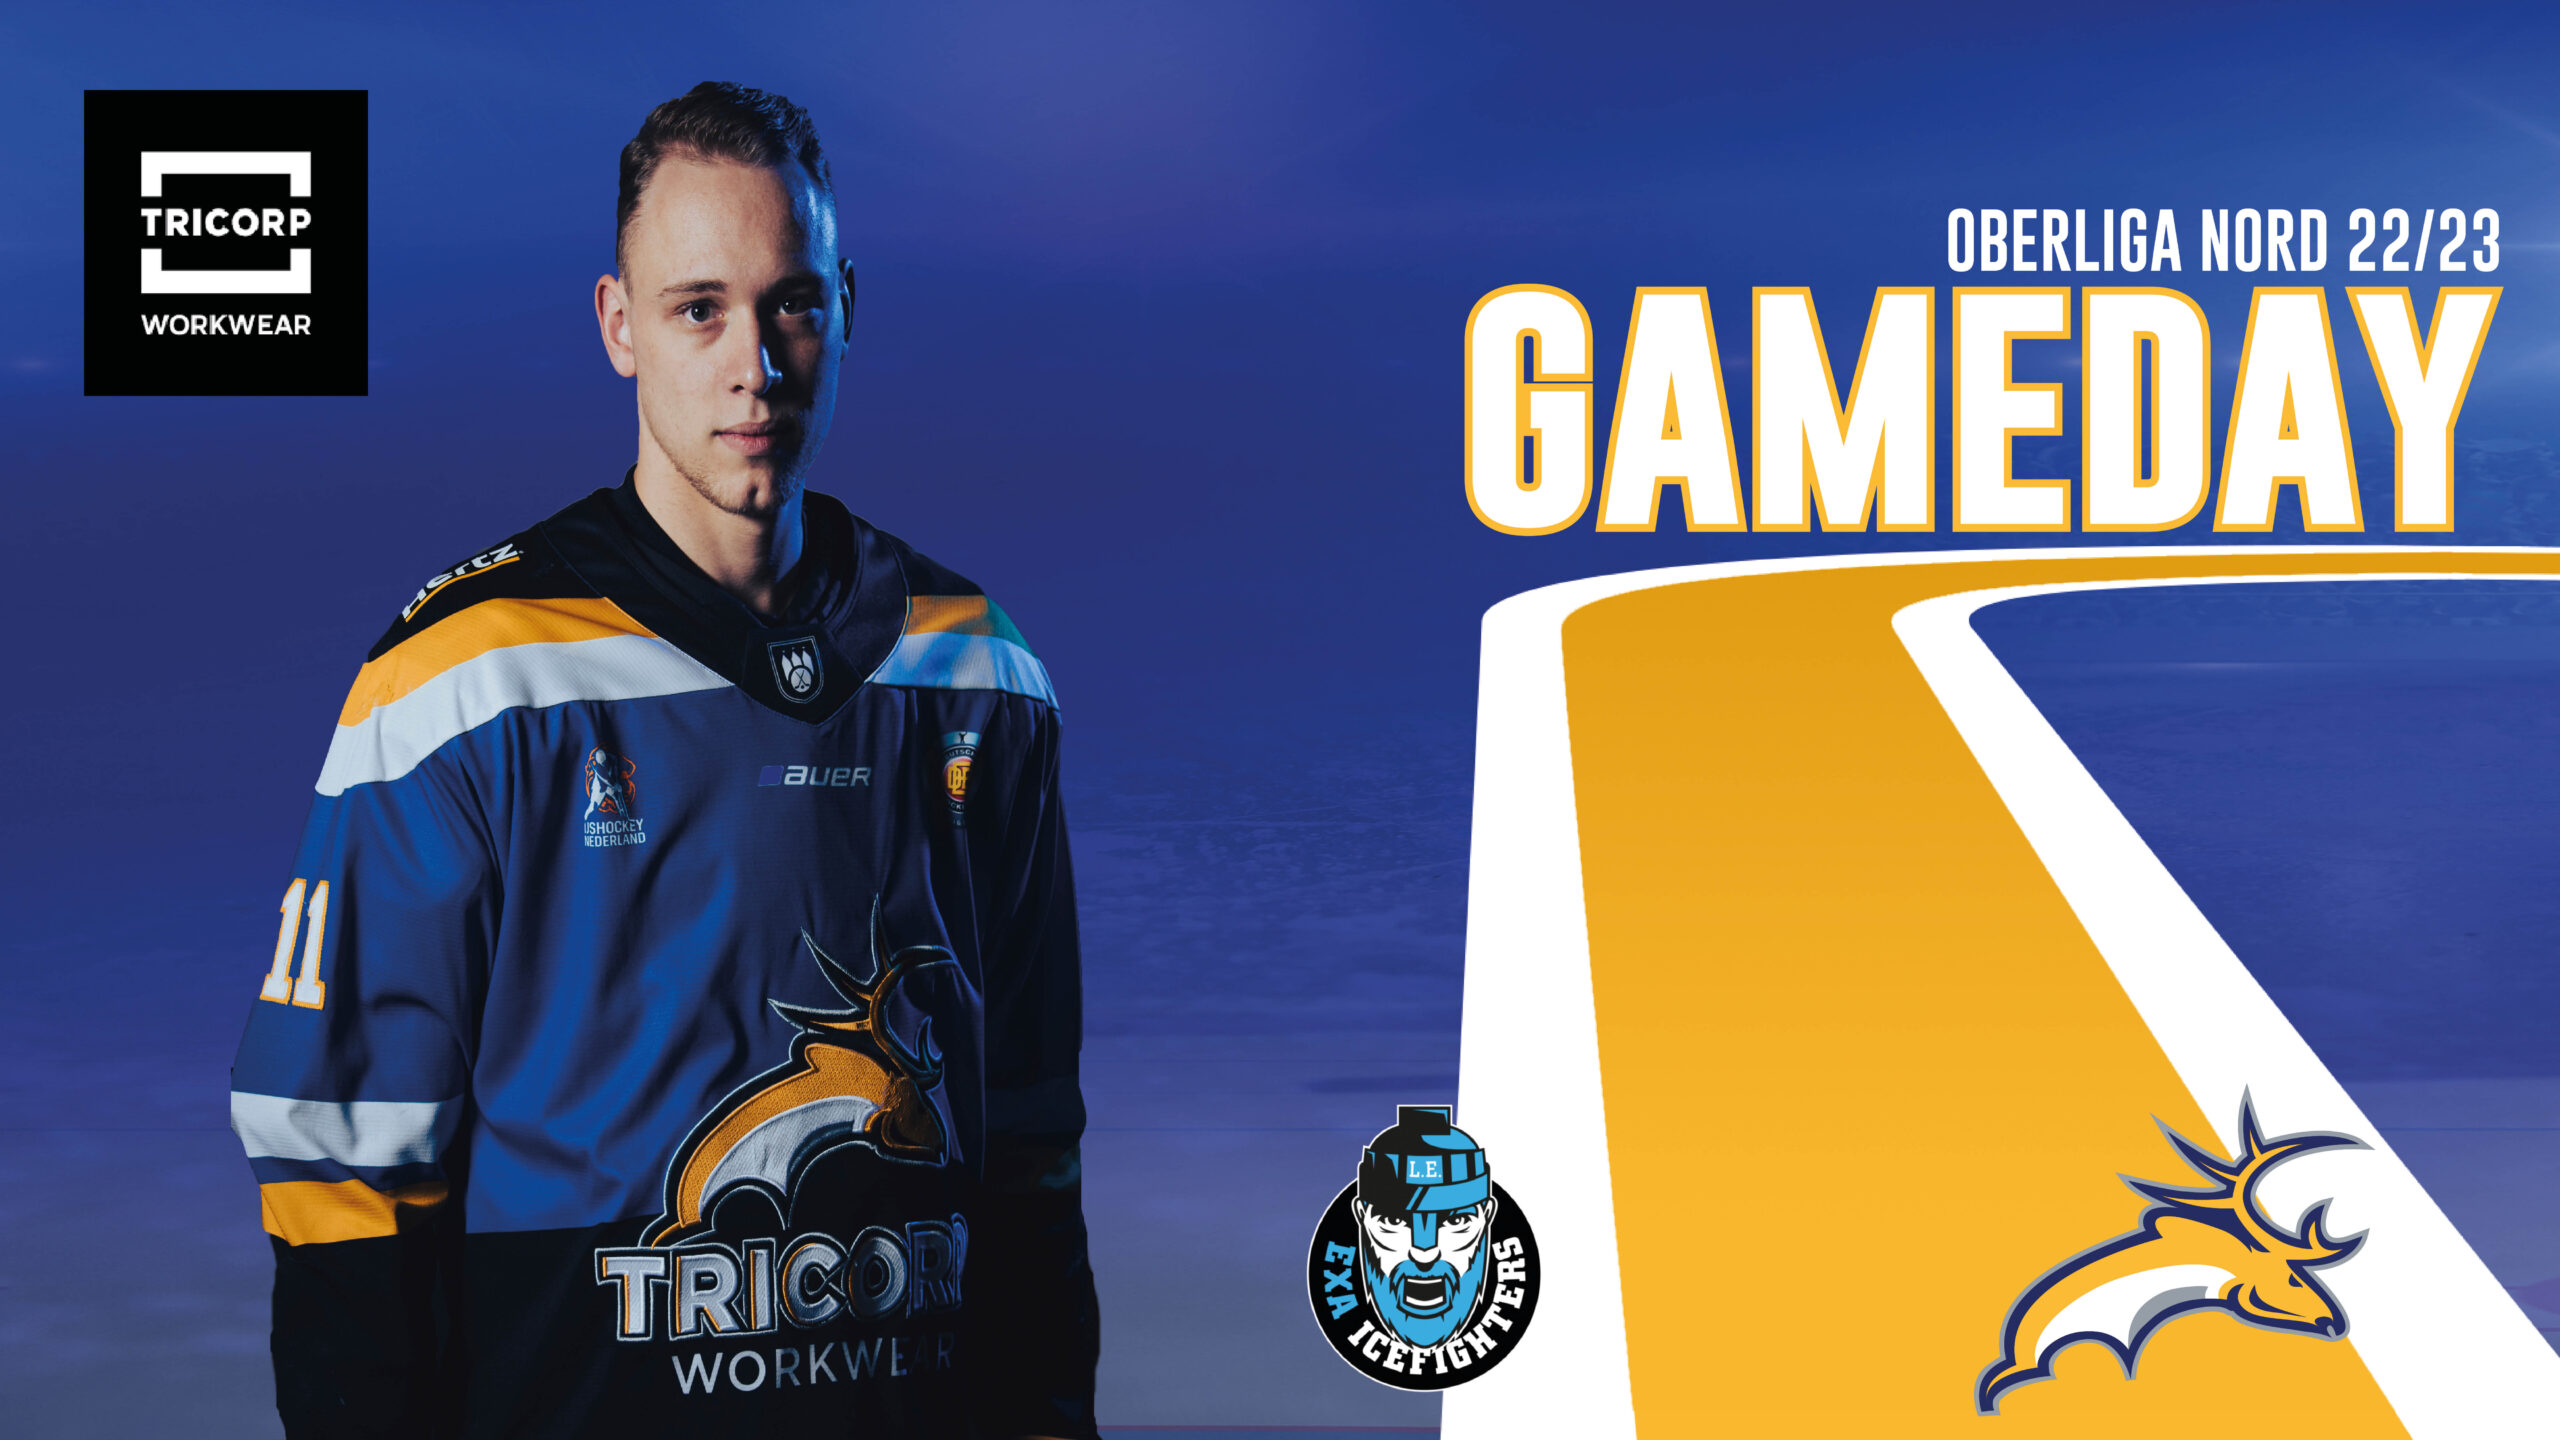 GAMEDAY: Exa Icefighters Leipzig vs. Tilburg Trappers